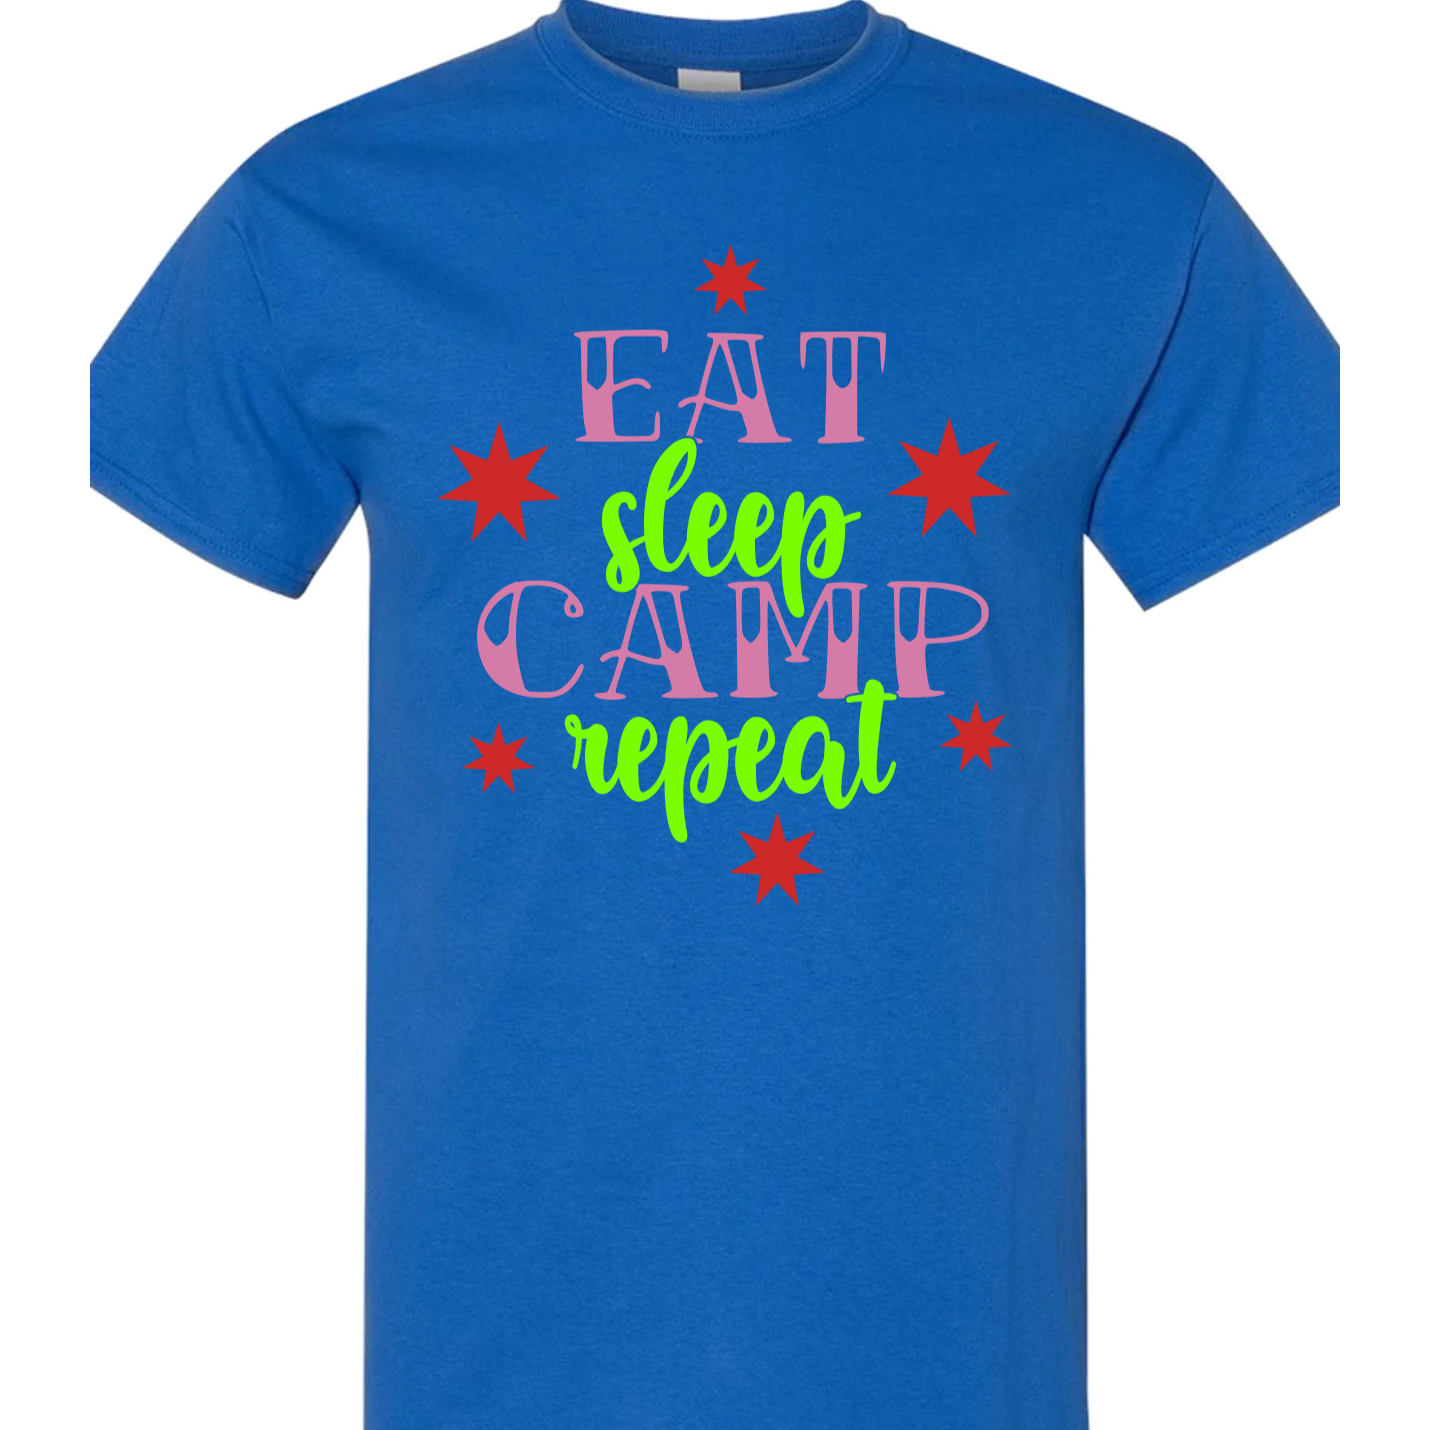 Eat Sleep Camp Repeat Vinyl Graphic for Shirts